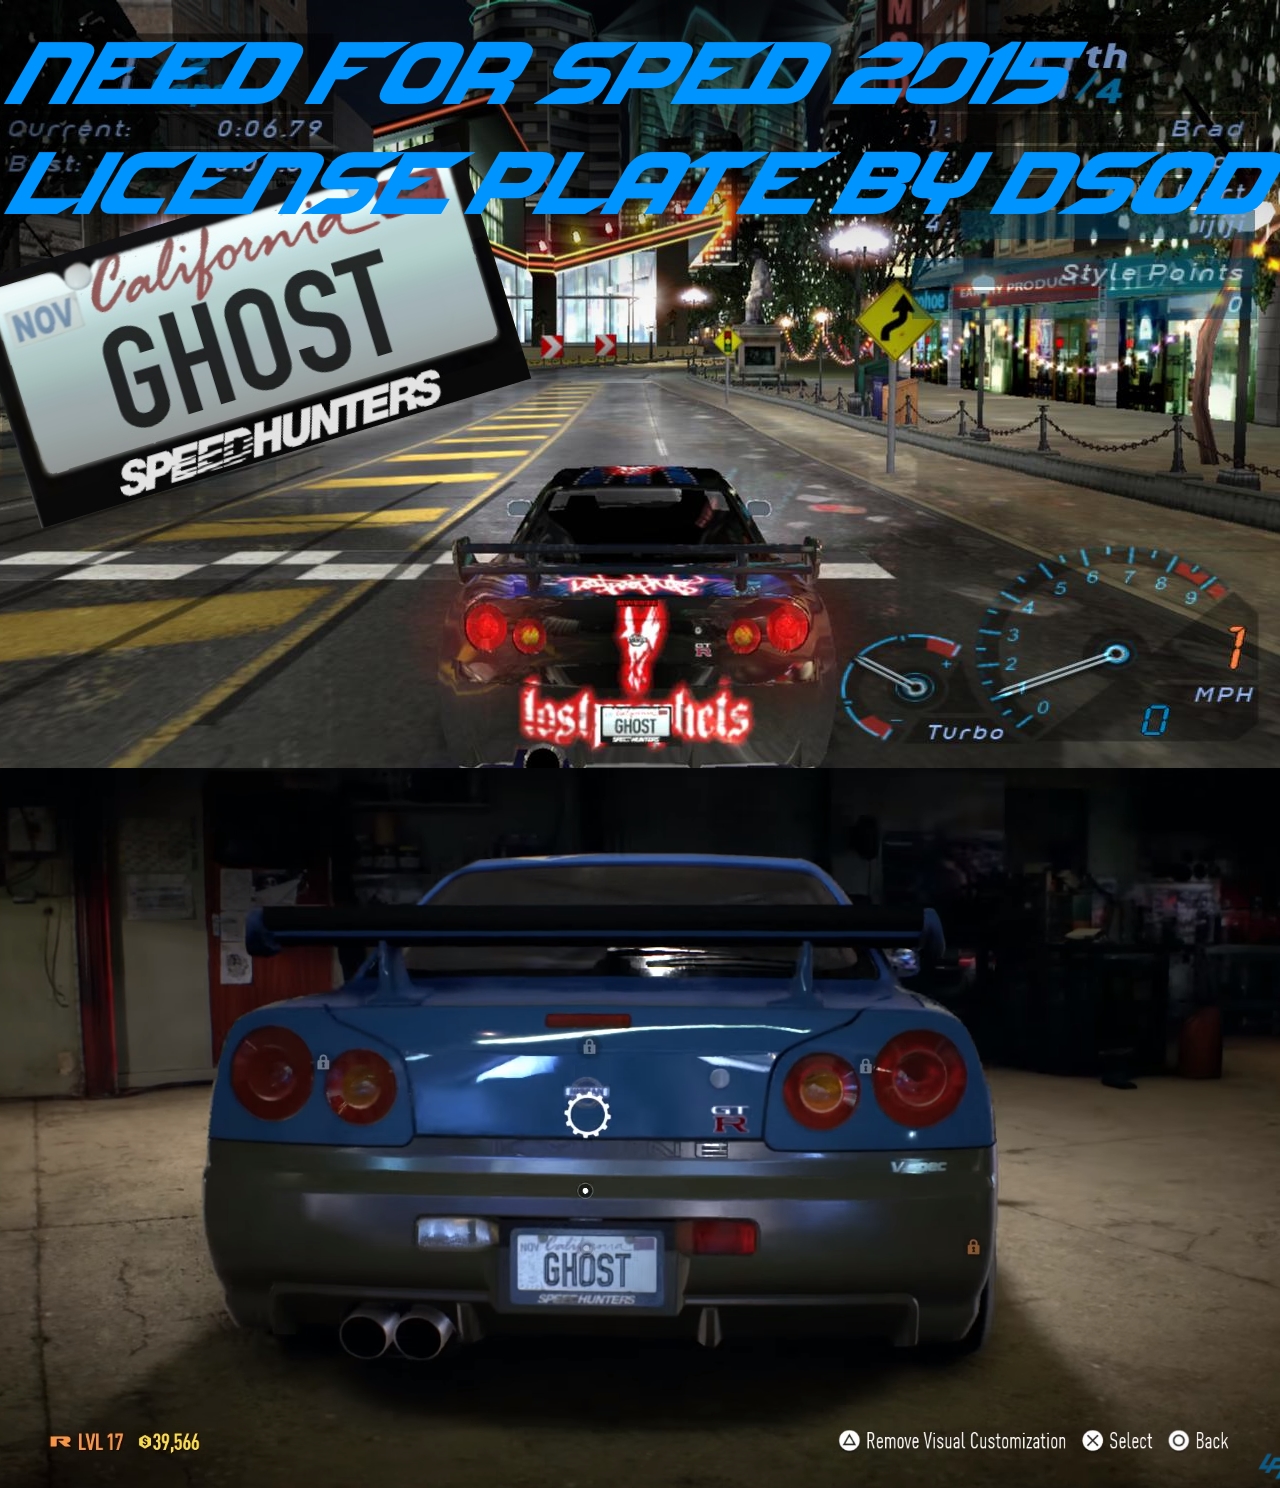 Need For Speed 2015 License plate